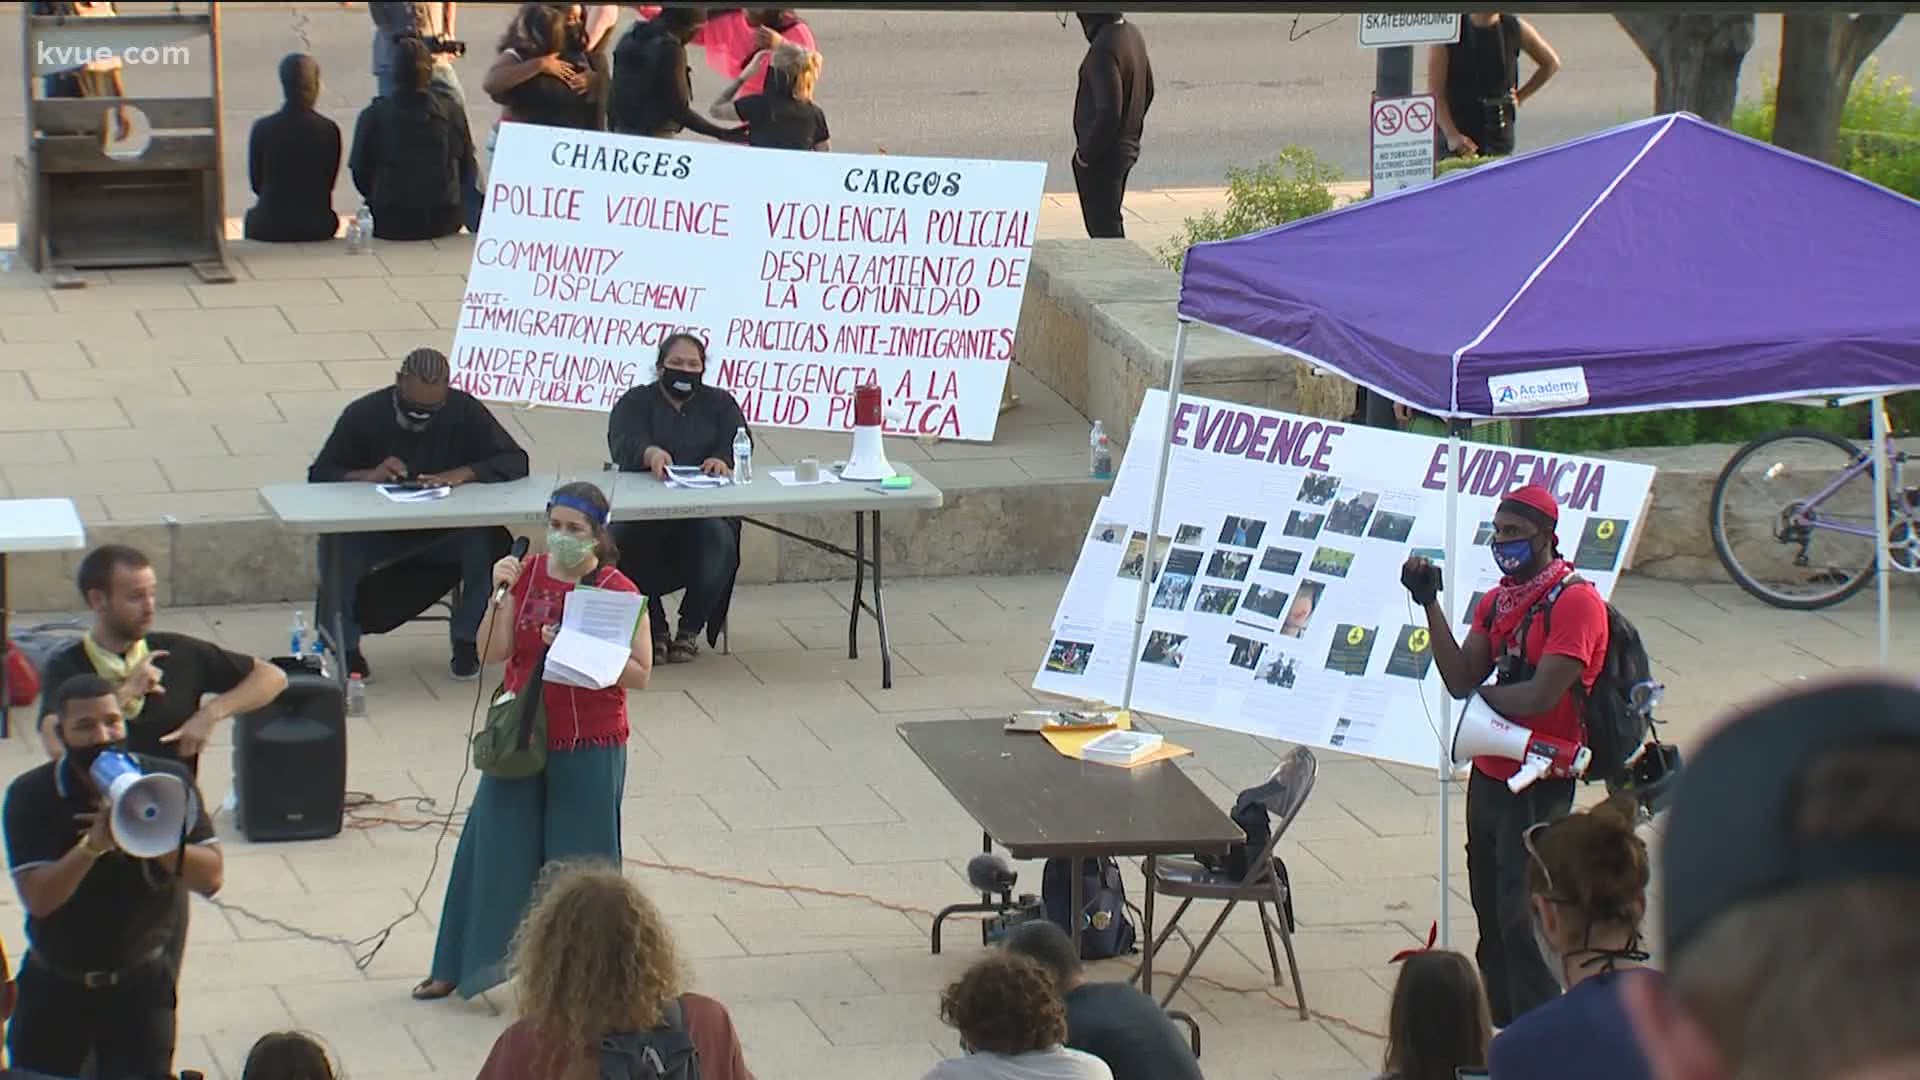 The calls for cutting the Austin Police Department budget continued on Saturday night. Demonstrators put City Council "on trial" in a mock display.